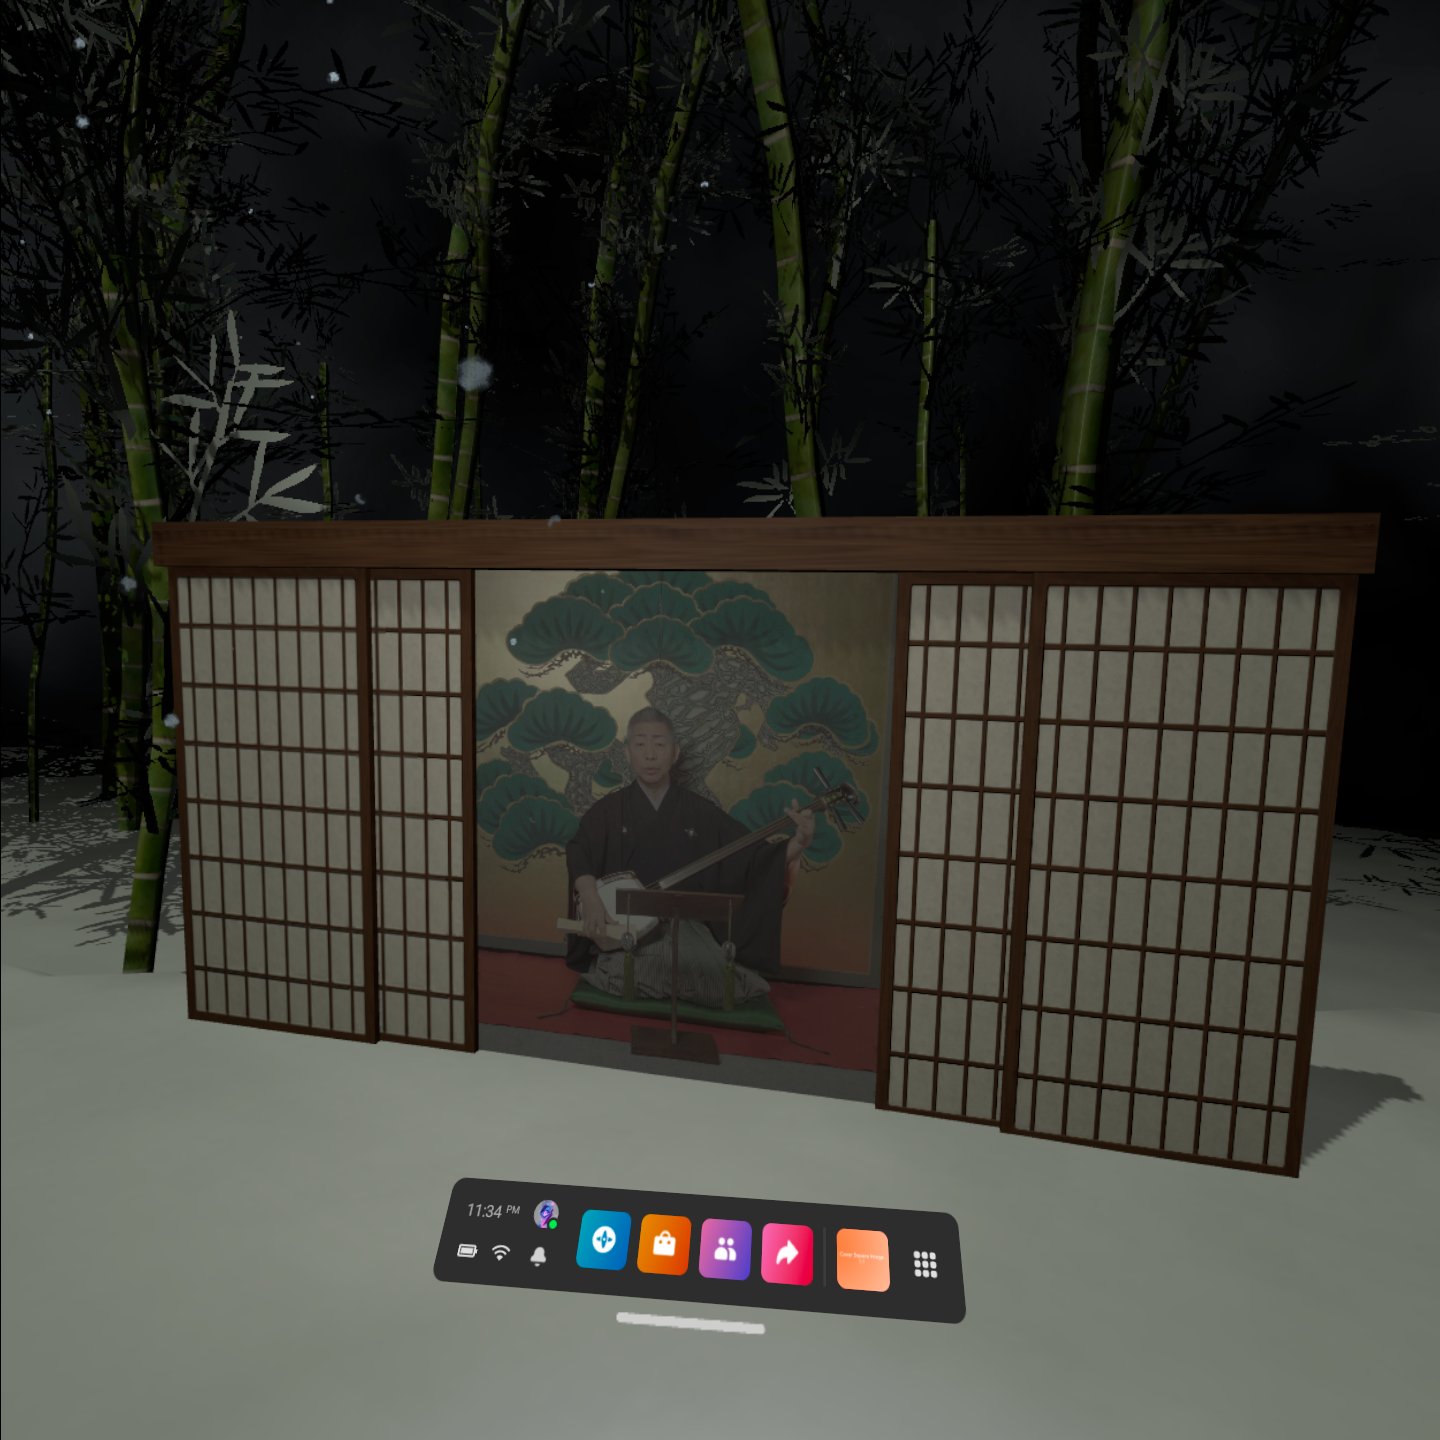  Image of Shamisen player embedded in shoji screens in a bamboo forest  with a VR control panel visible 